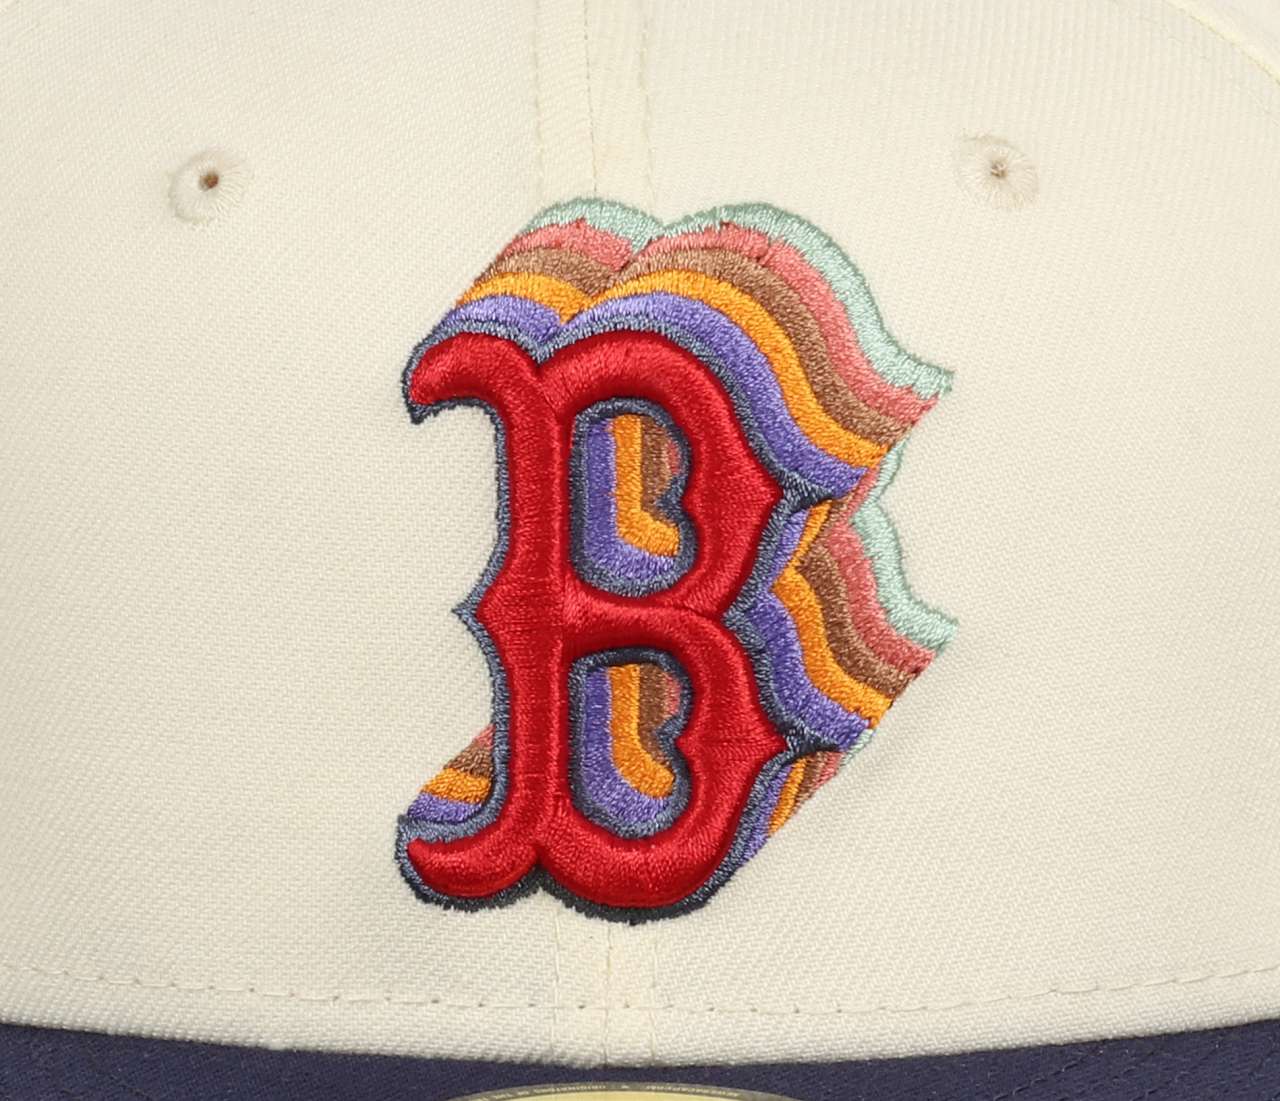 Boston Red Sox MLB Sidepatch Chrome Blue 59Fifty Basecap New Era